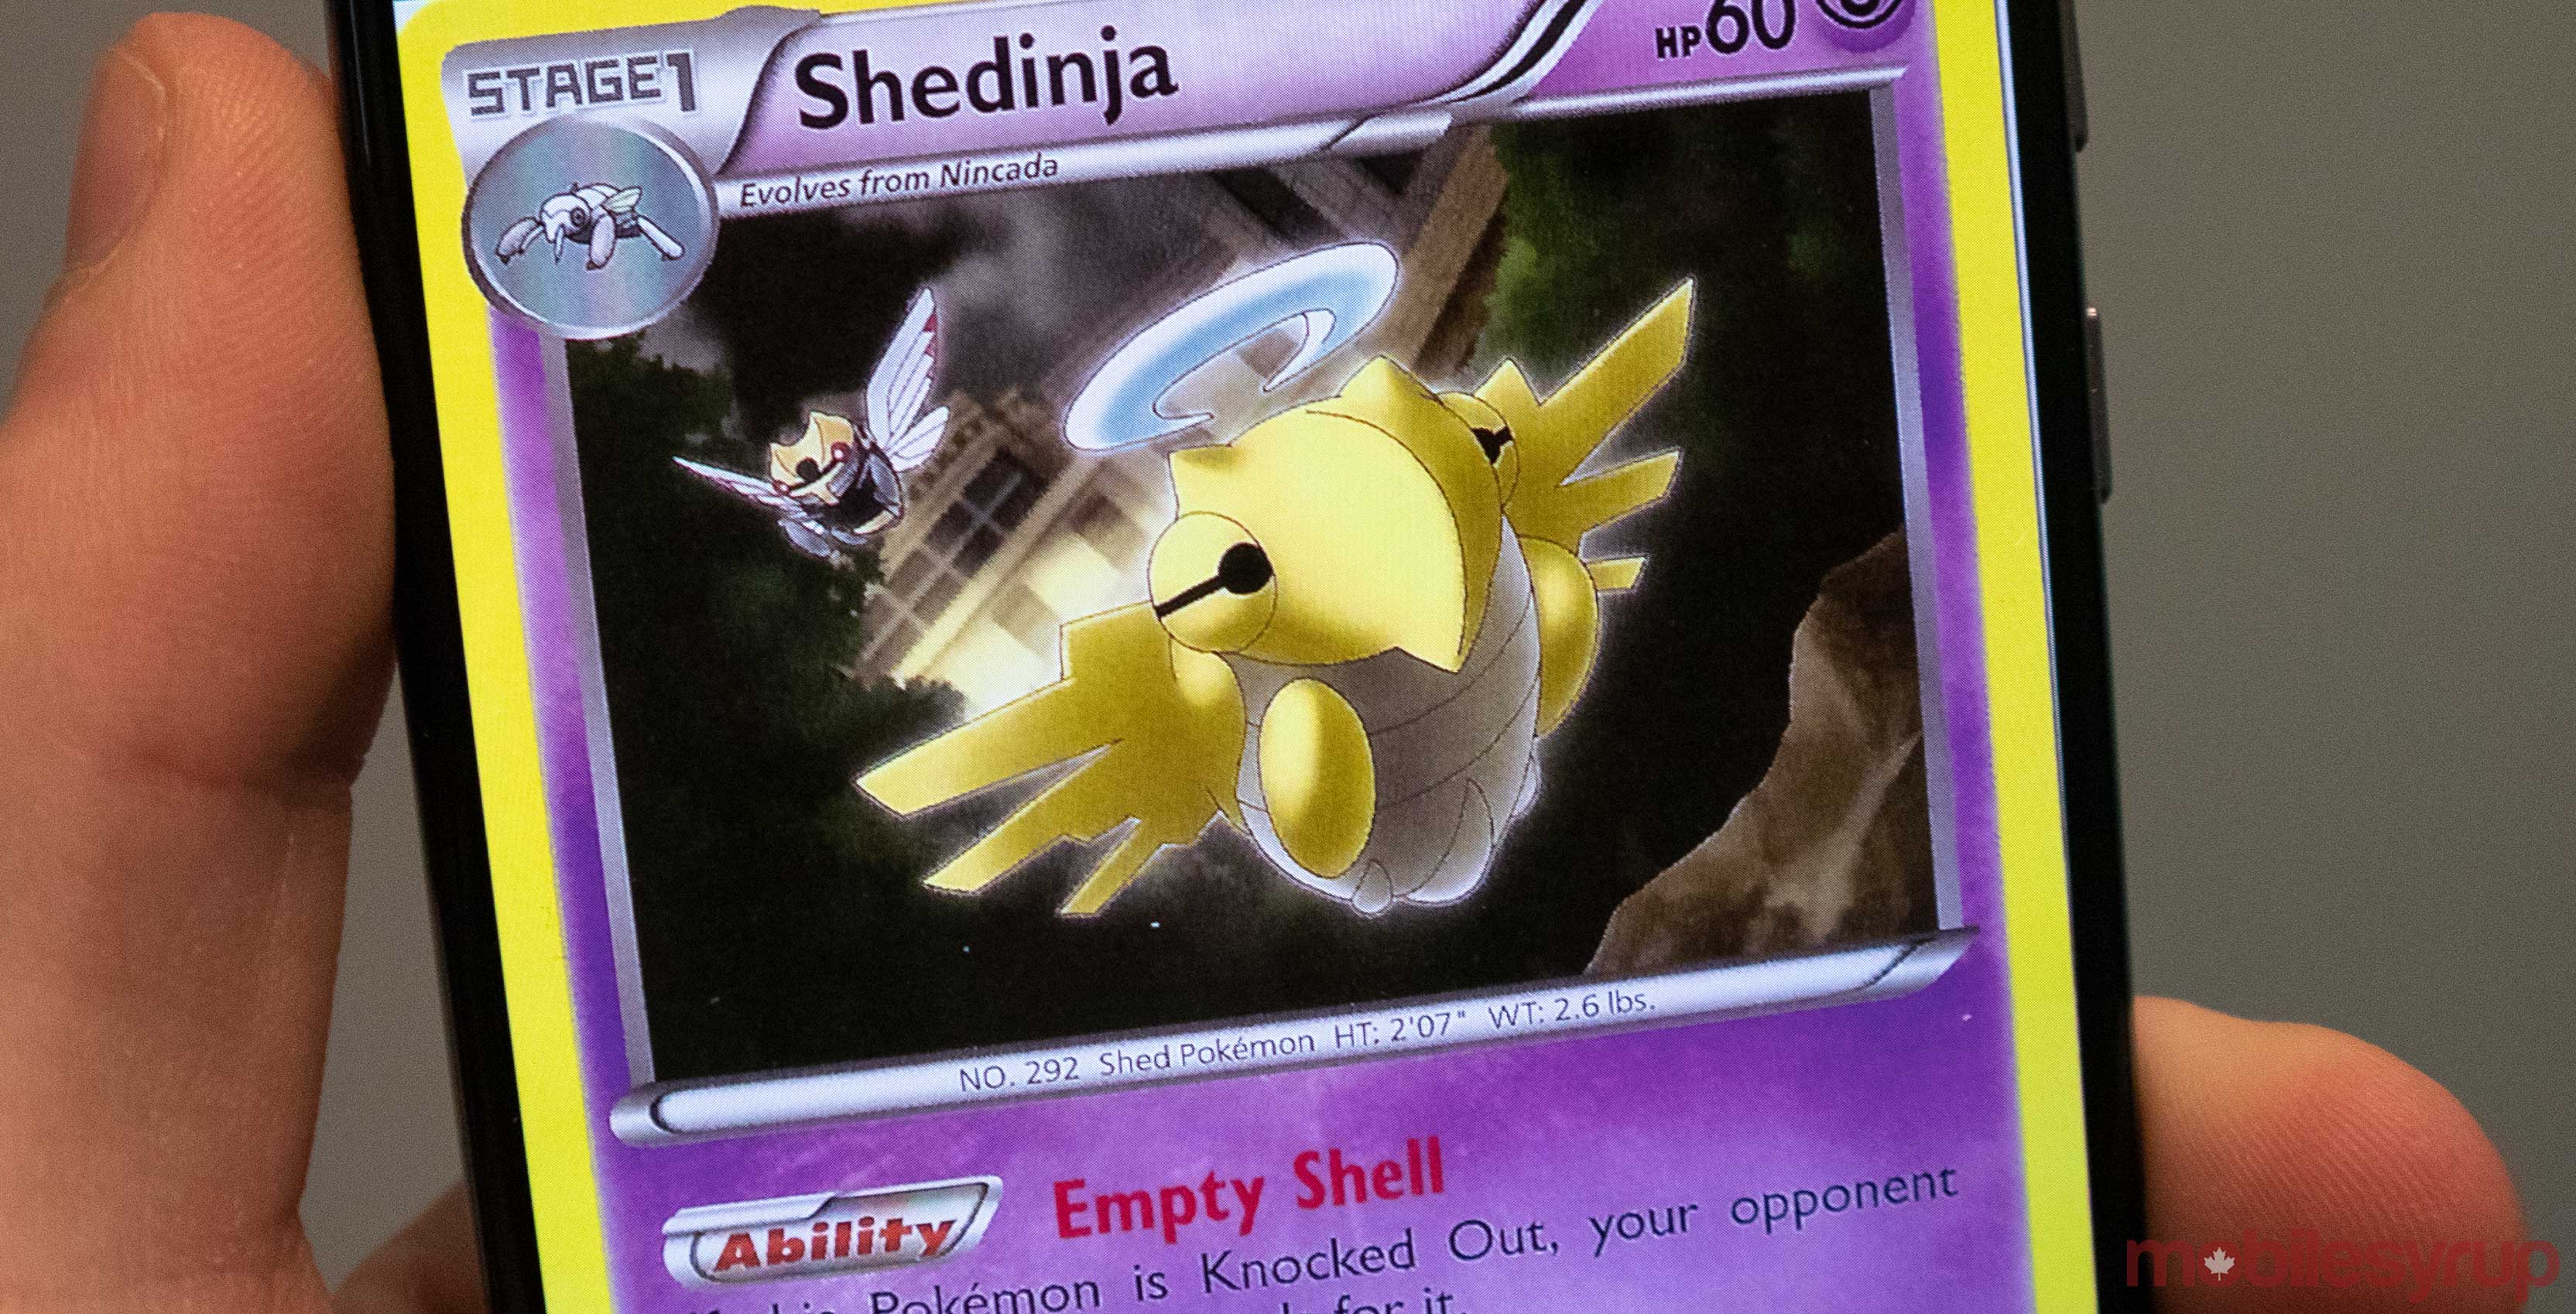 Shedinja is finally being added to Pokemon Go as a Field Research reward.